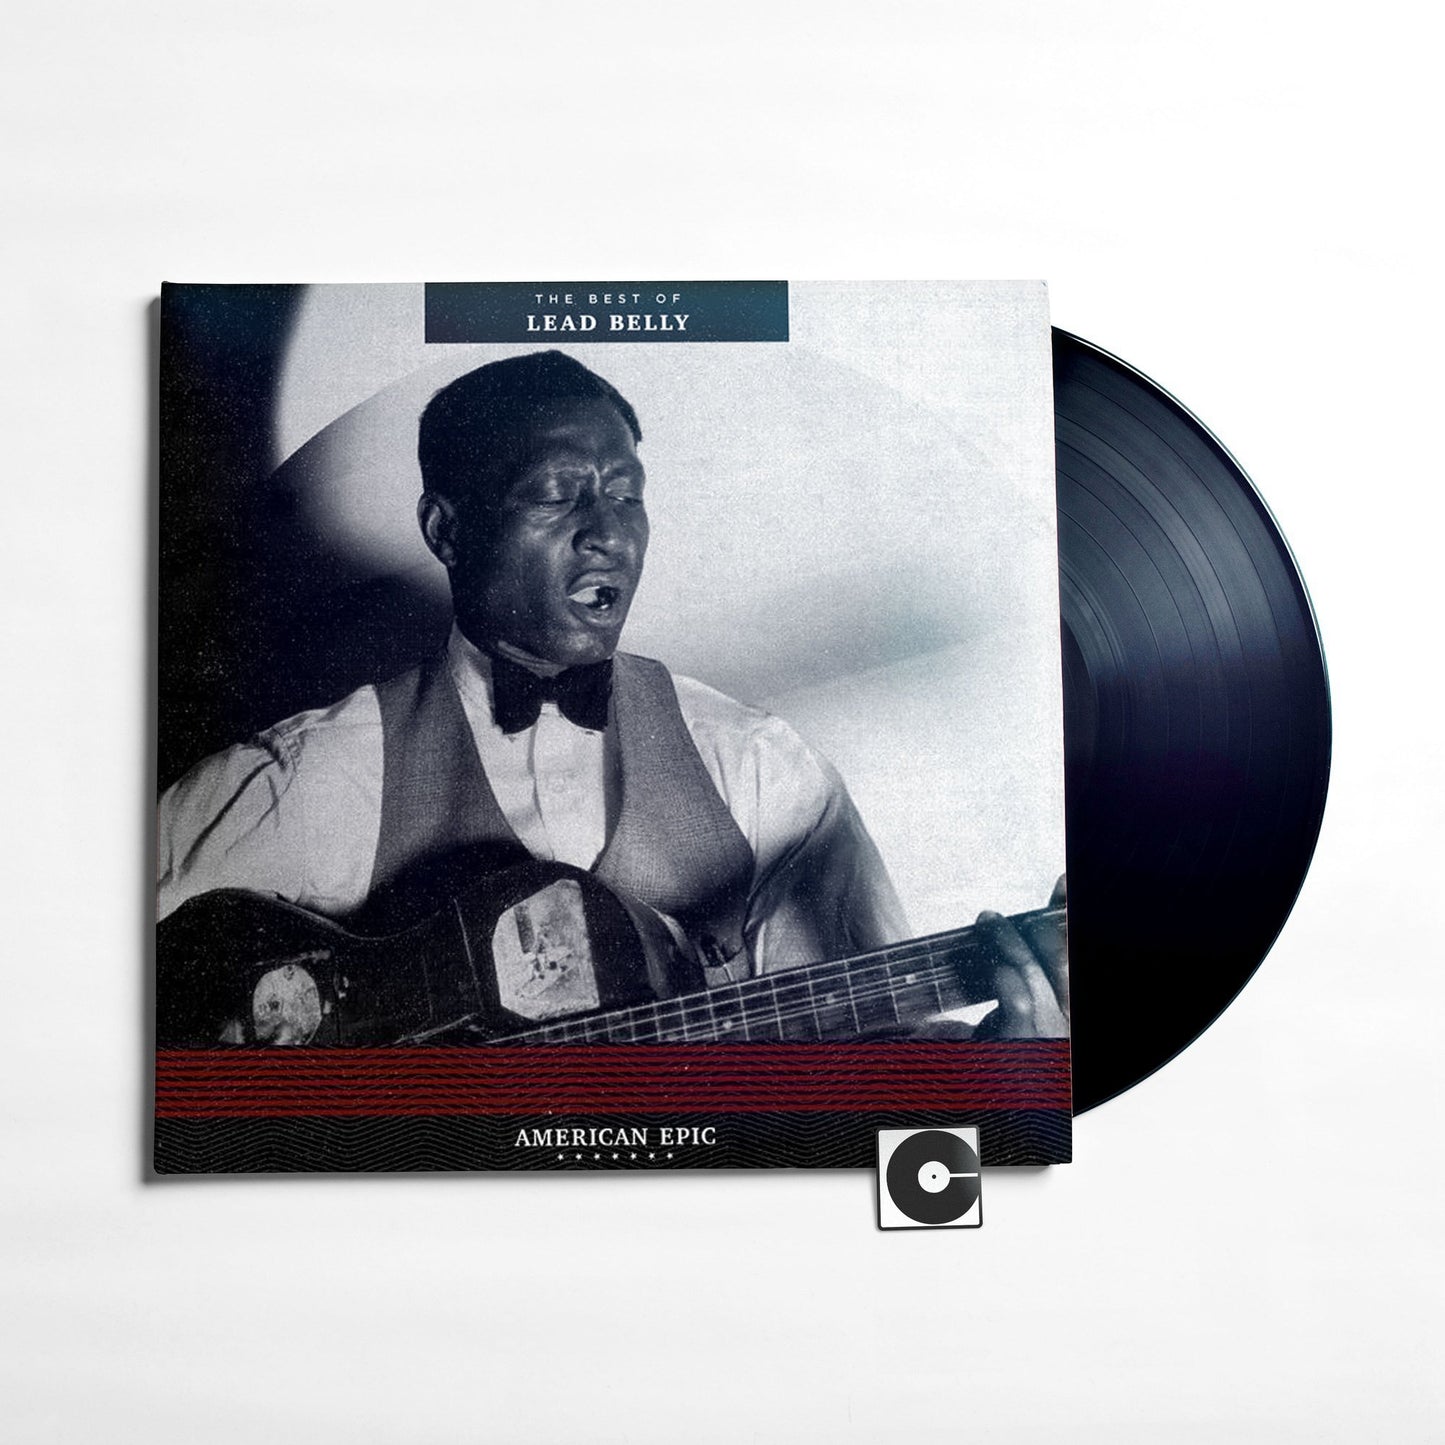 Lead Belly - "The Best Of Lead Belly"